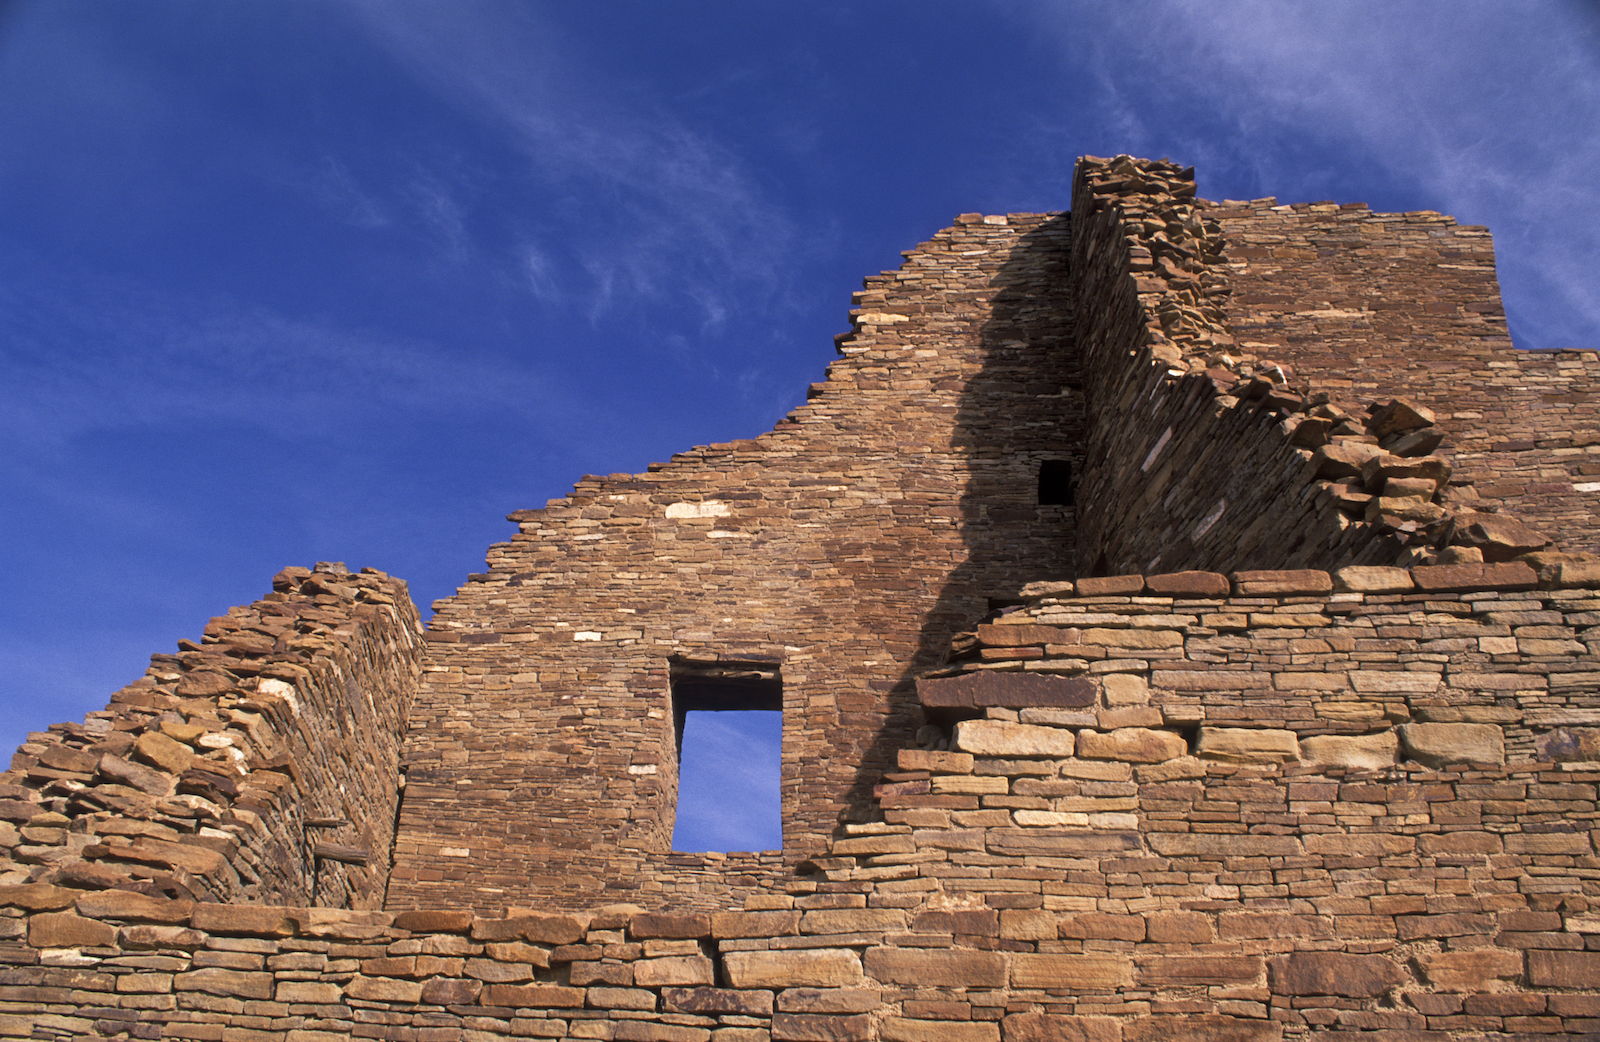 blue skies and a red-brown stone structure with a window set in the center